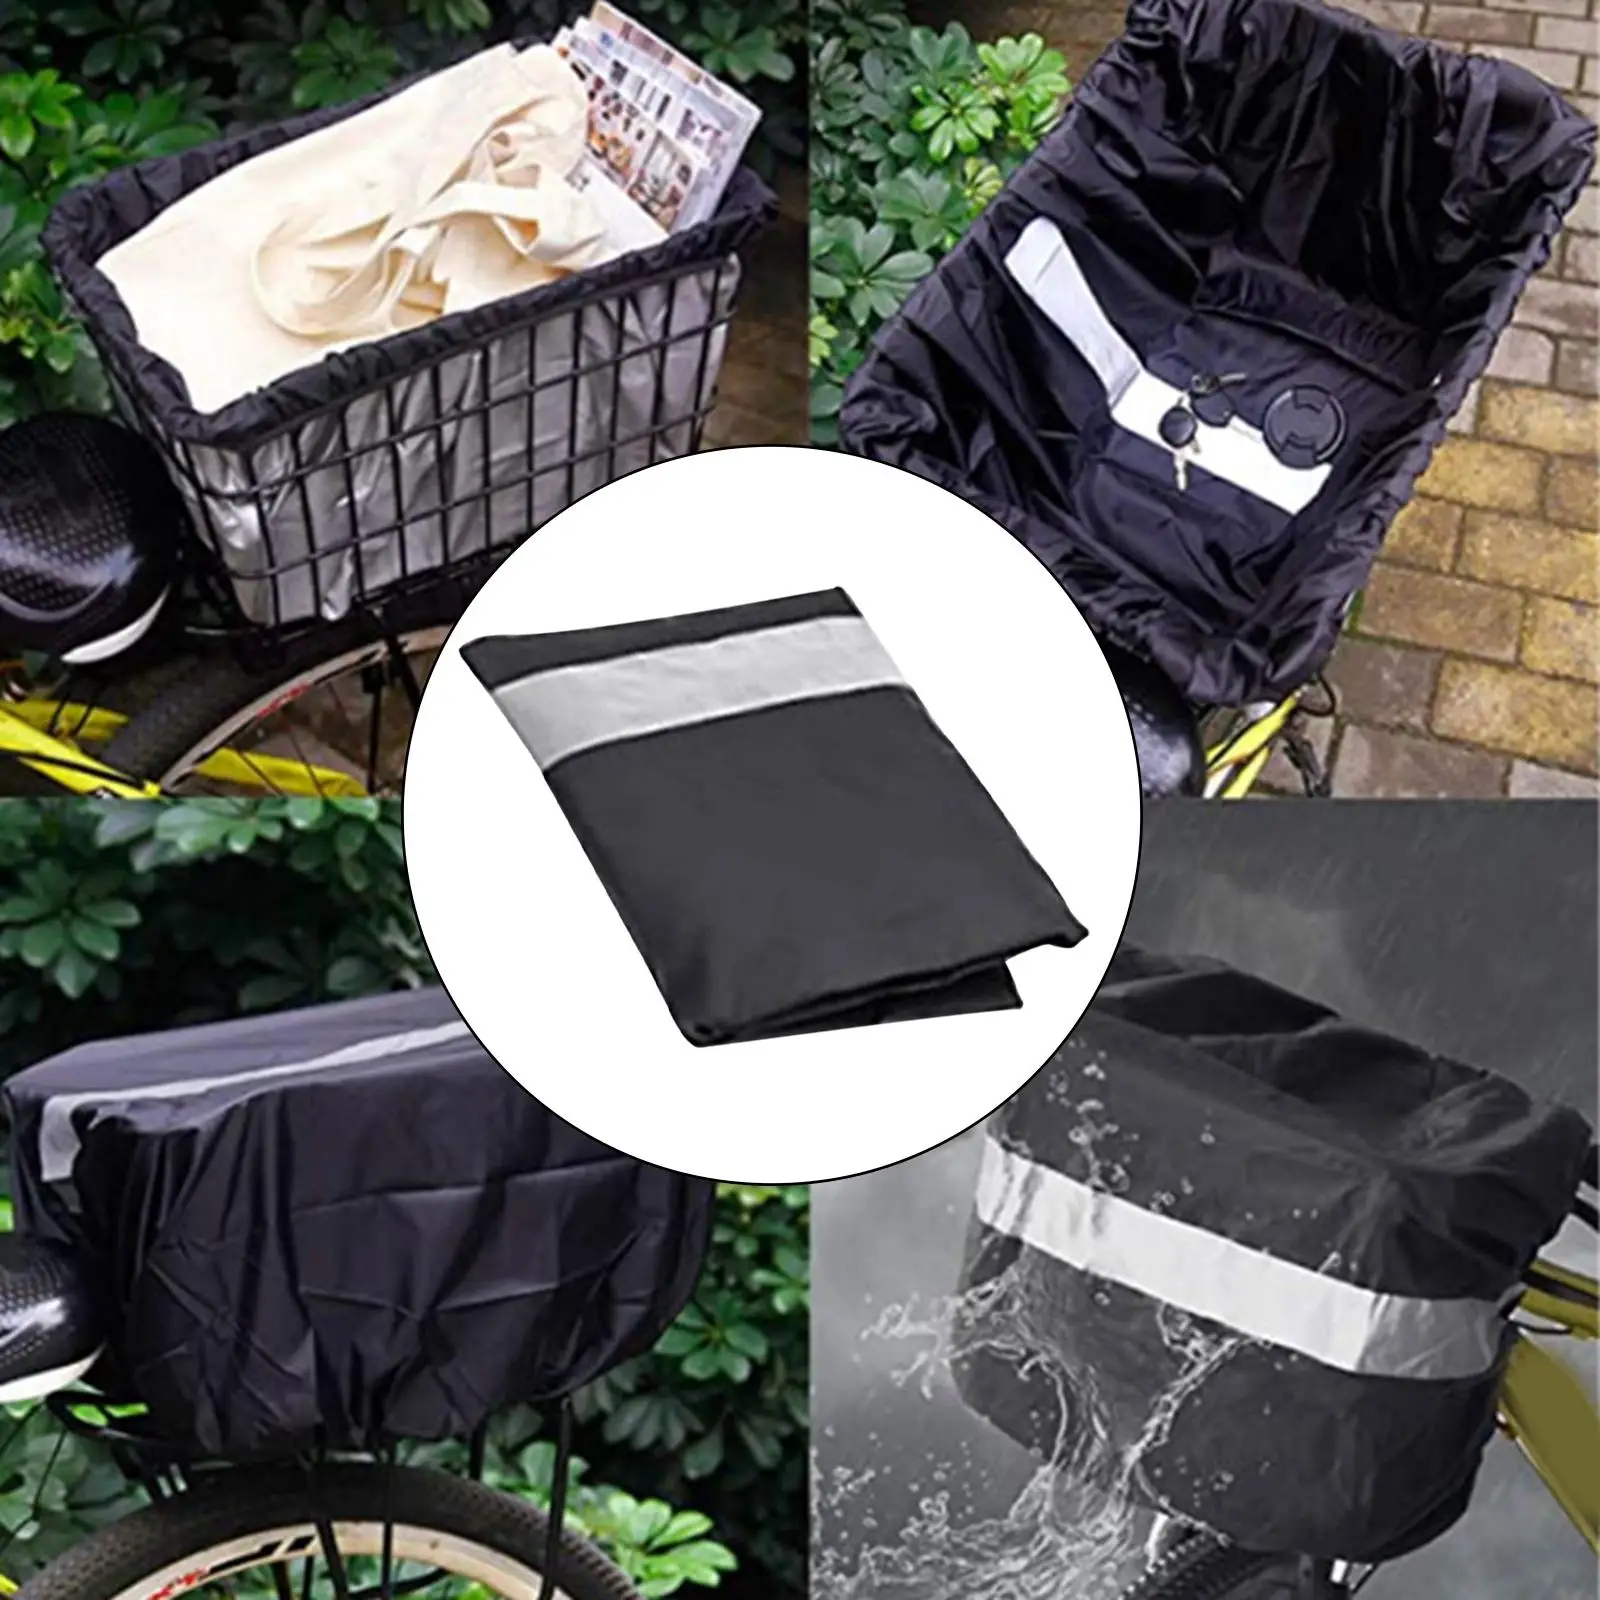 210  Basket  with Adjustable Band Bike Accessories Handlebar Pannier  Washable Bicycle Basket Cover